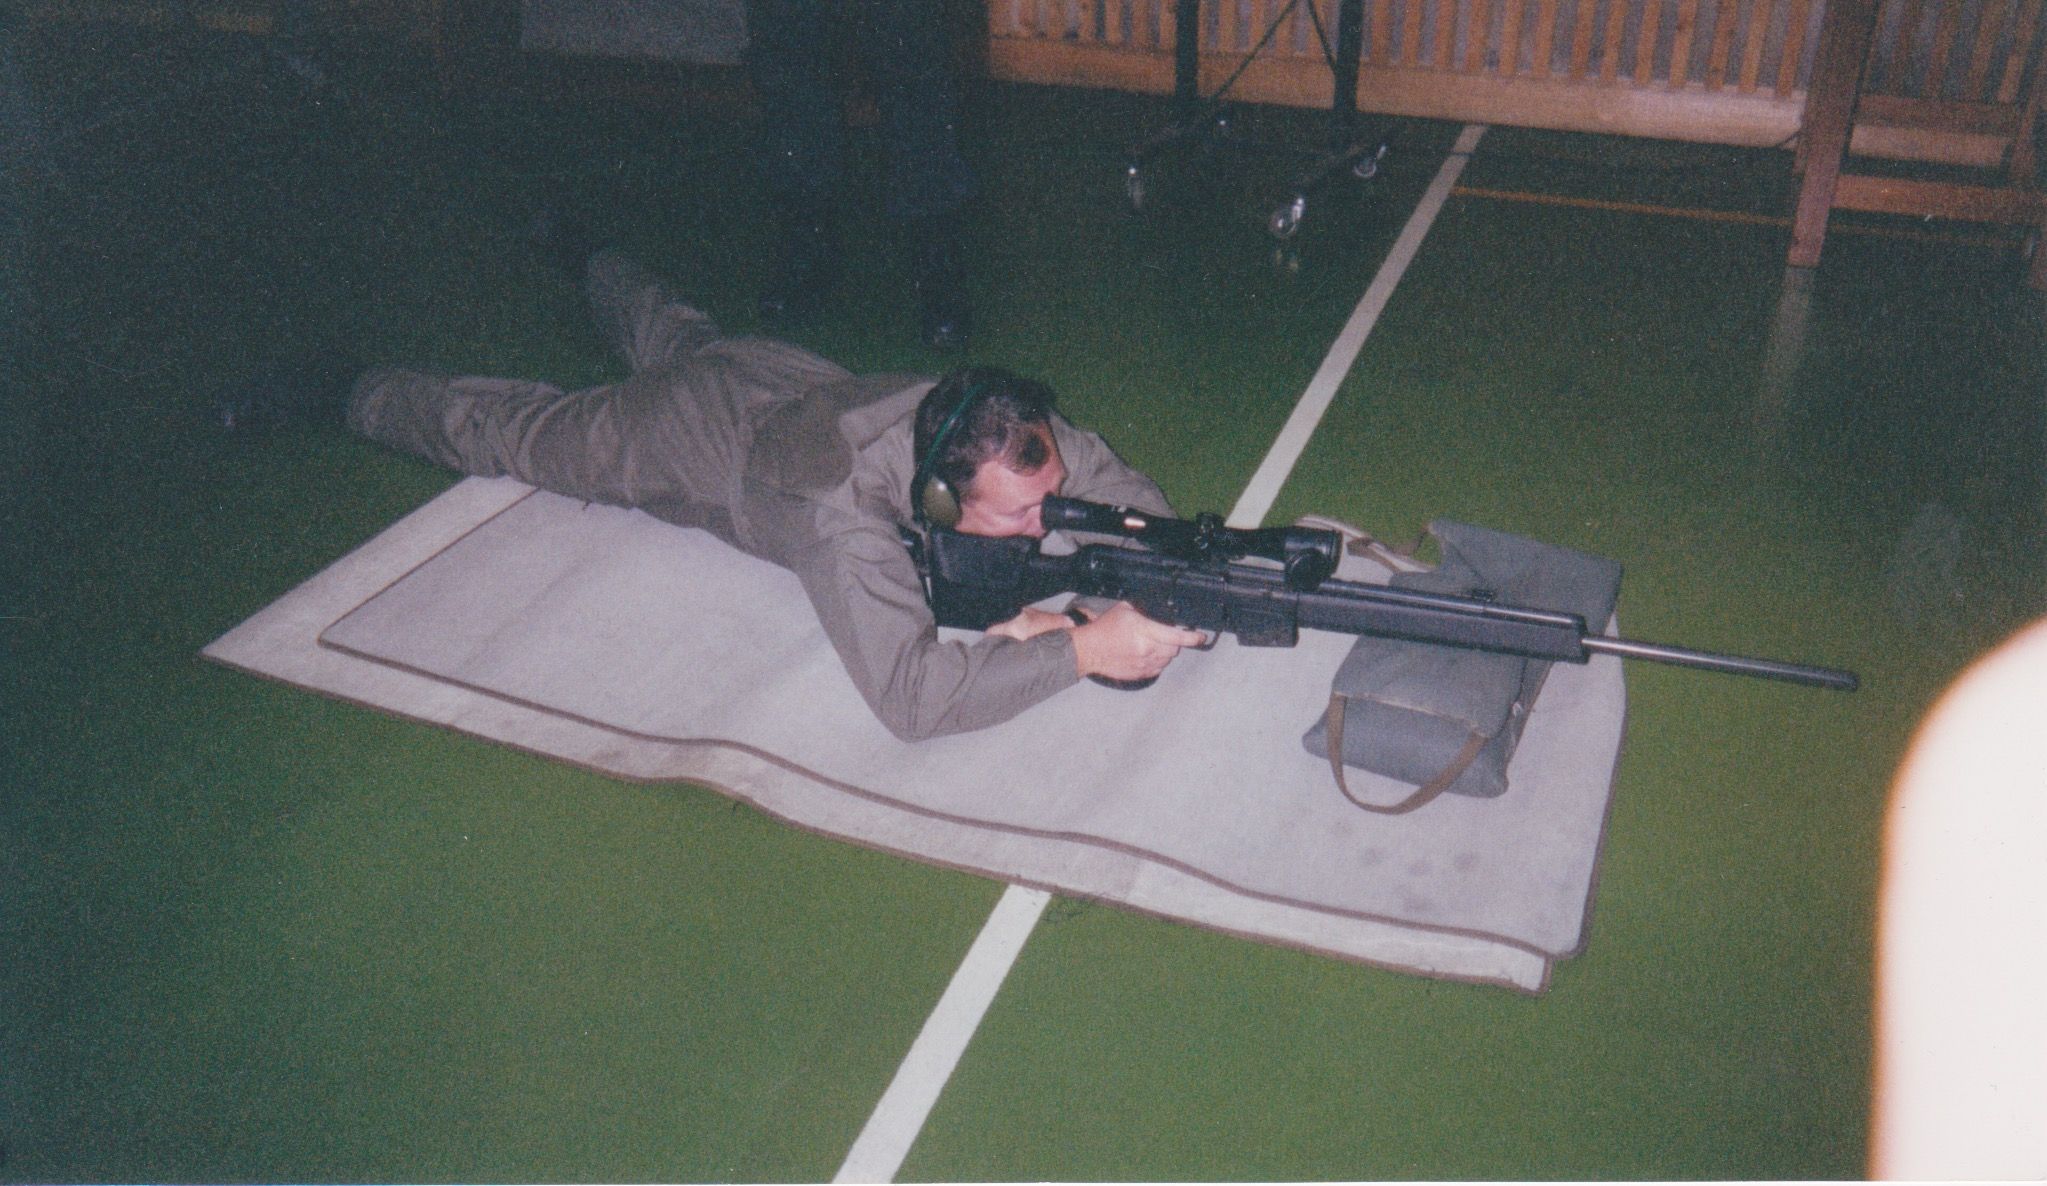 Here Jim is being trained by Germany's national counterterrorist  Sniper Unit instructors in snipercraft.